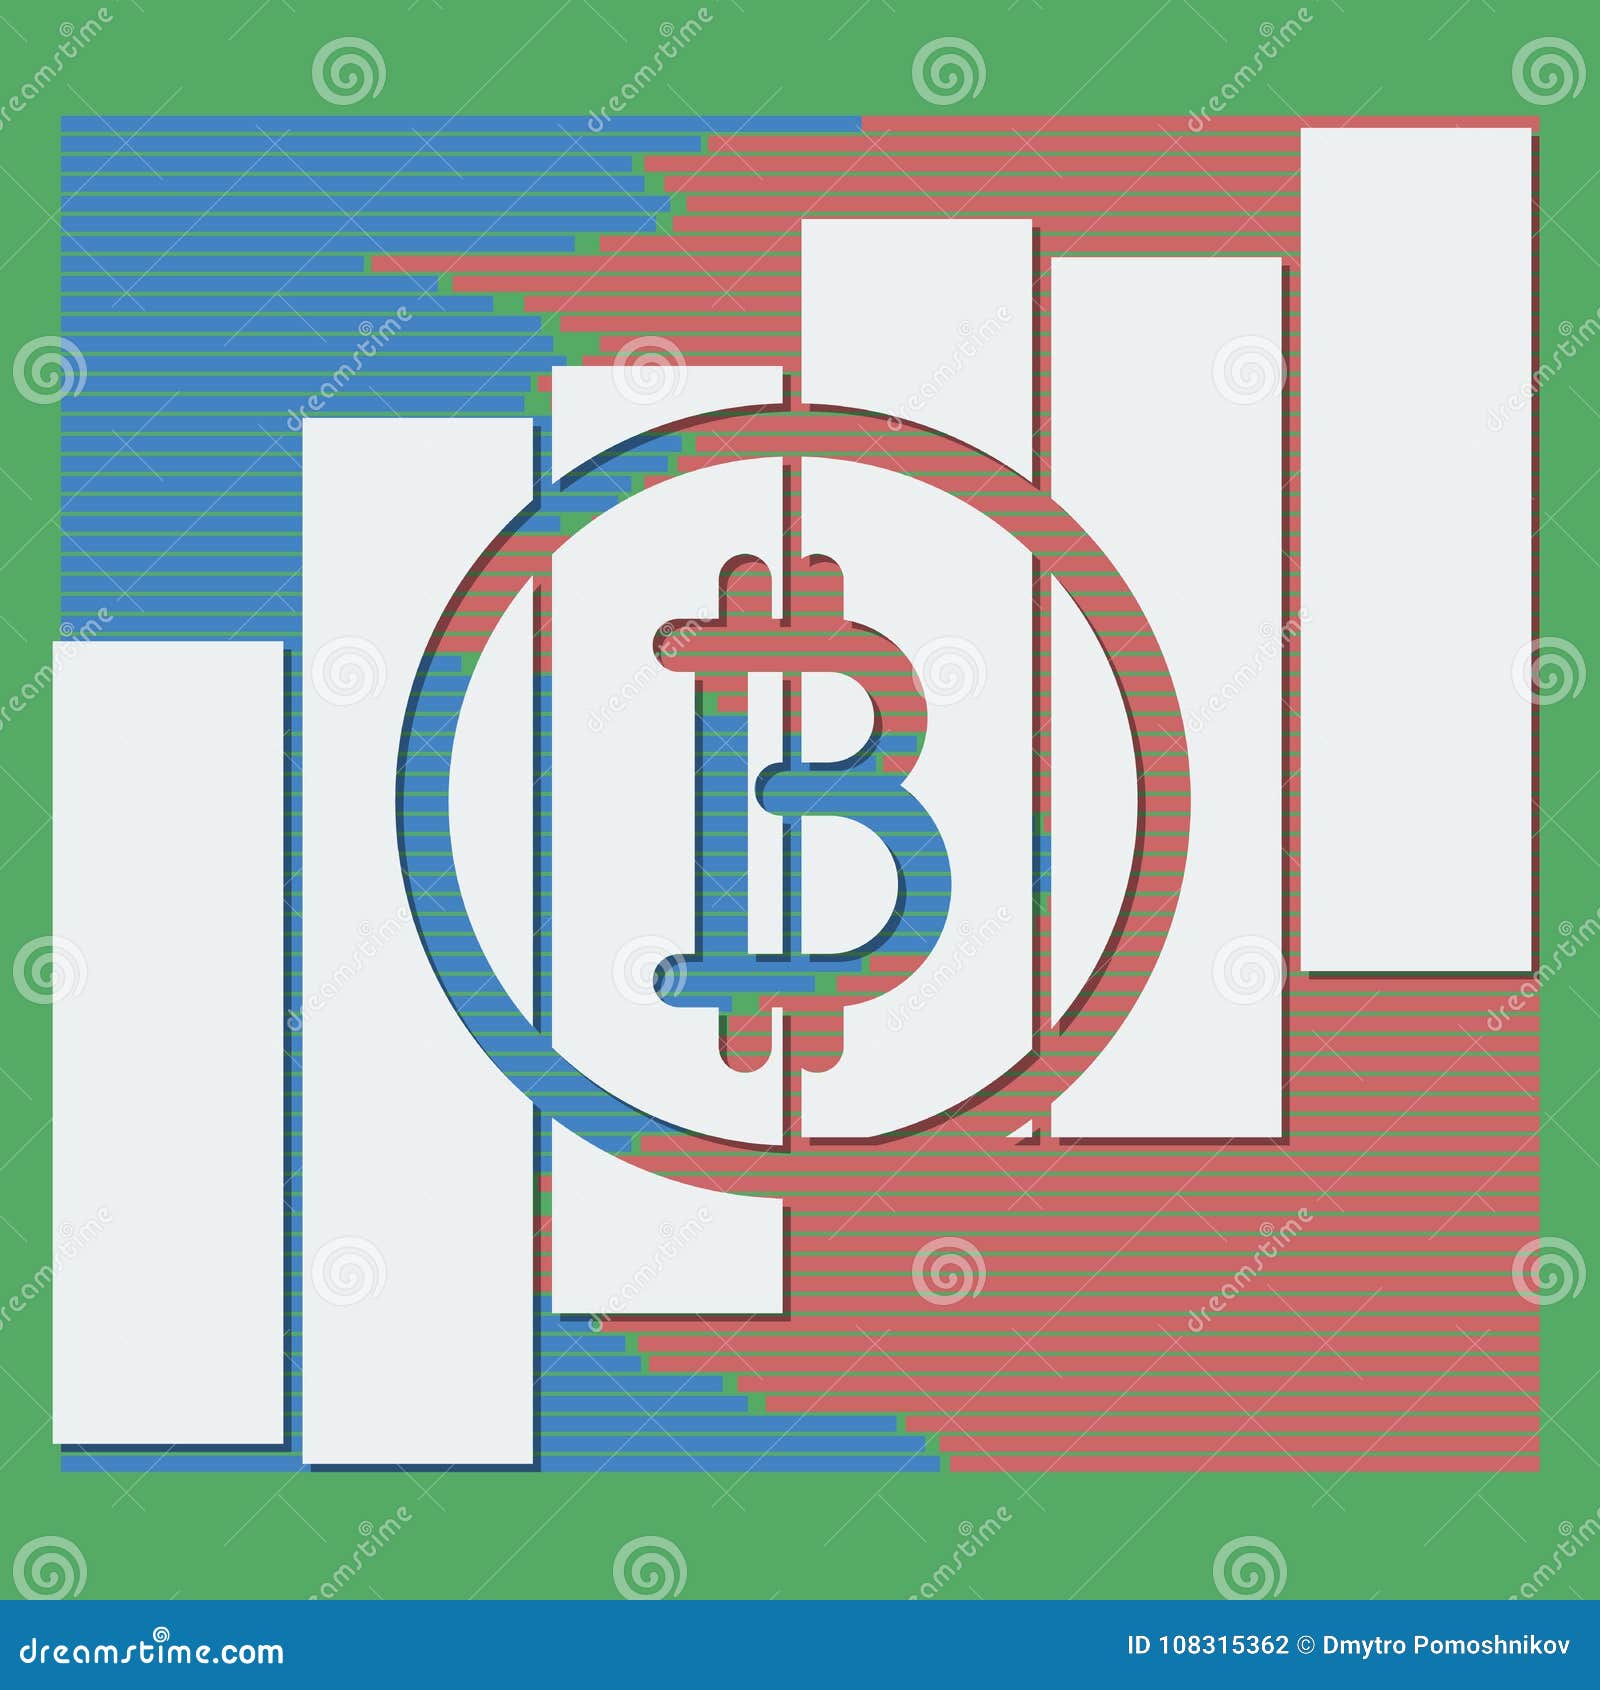 Bitcoin Logo Currency With Market Color Volumes Columns Stock - 